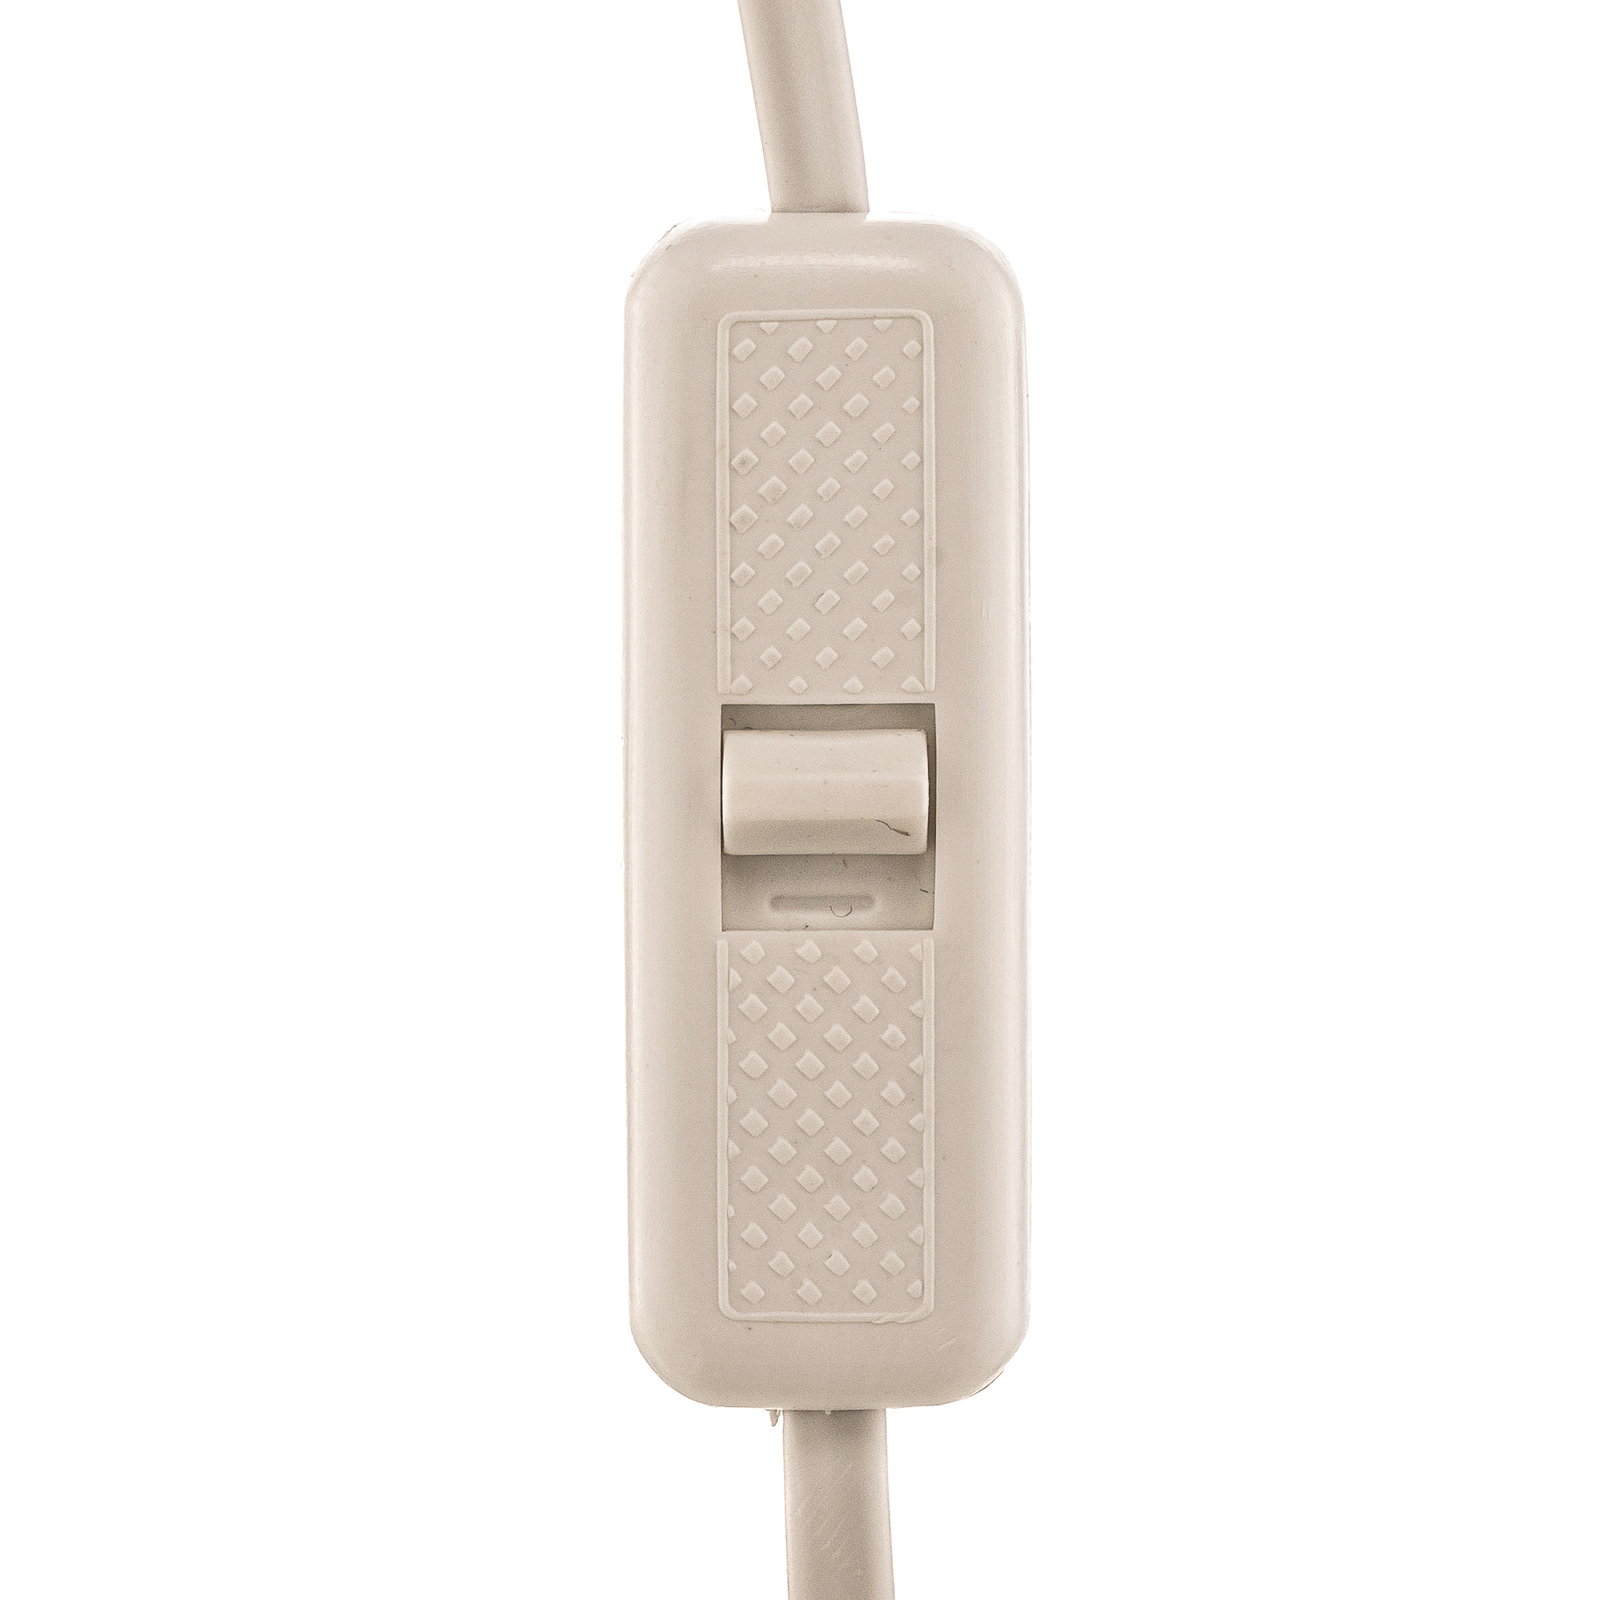 KM White clip-on light with cable and plug, E14